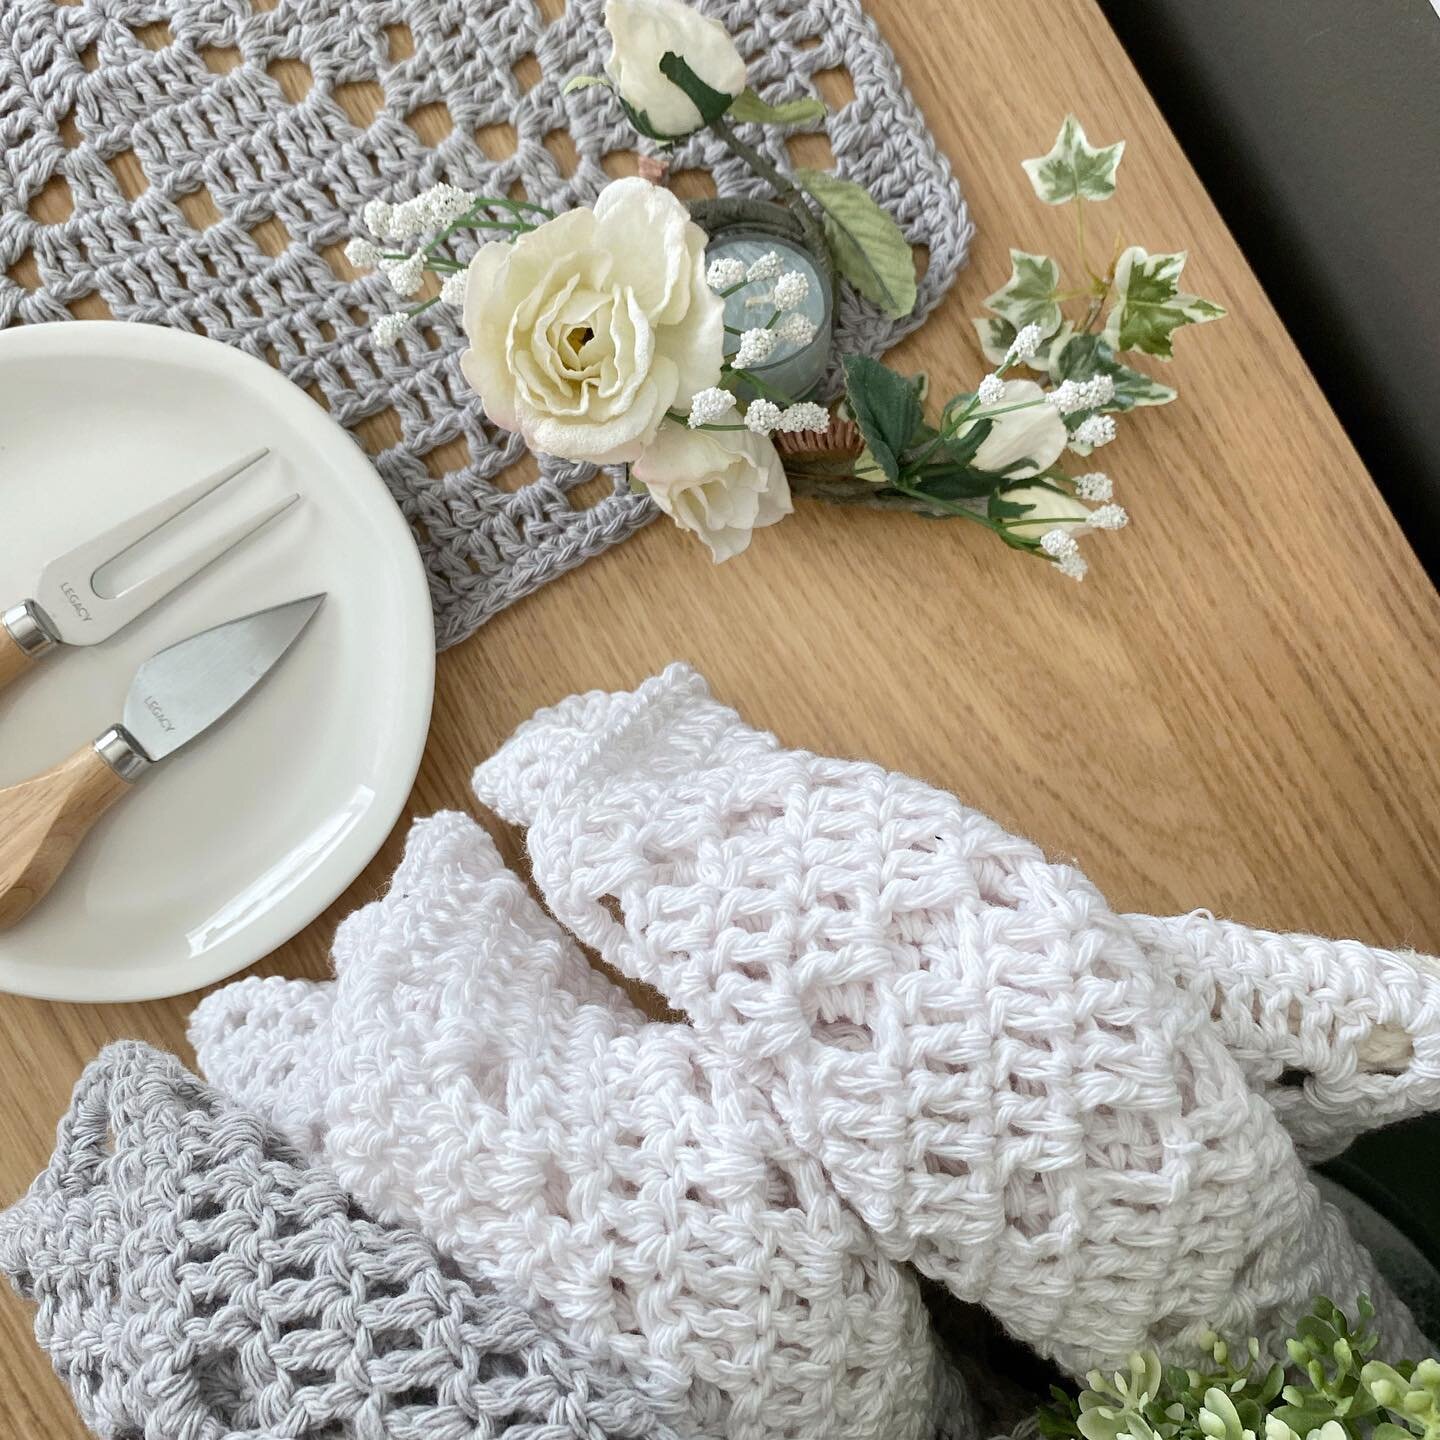 Crochet placemat pattern is done and it&rsquo;s now in the tech editor&rsquo;s hands💫🖤👍 @capital.crochet 
⠀⠀⠀⠀⠀⠀⠀⠀⠀
I&rsquo;ll be calling for a few testers soon, so if you&rsquo;re on my testers list watch for an email. 
⠀⠀⠀⠀⠀⠀⠀⠀⠀
Made with 100% C